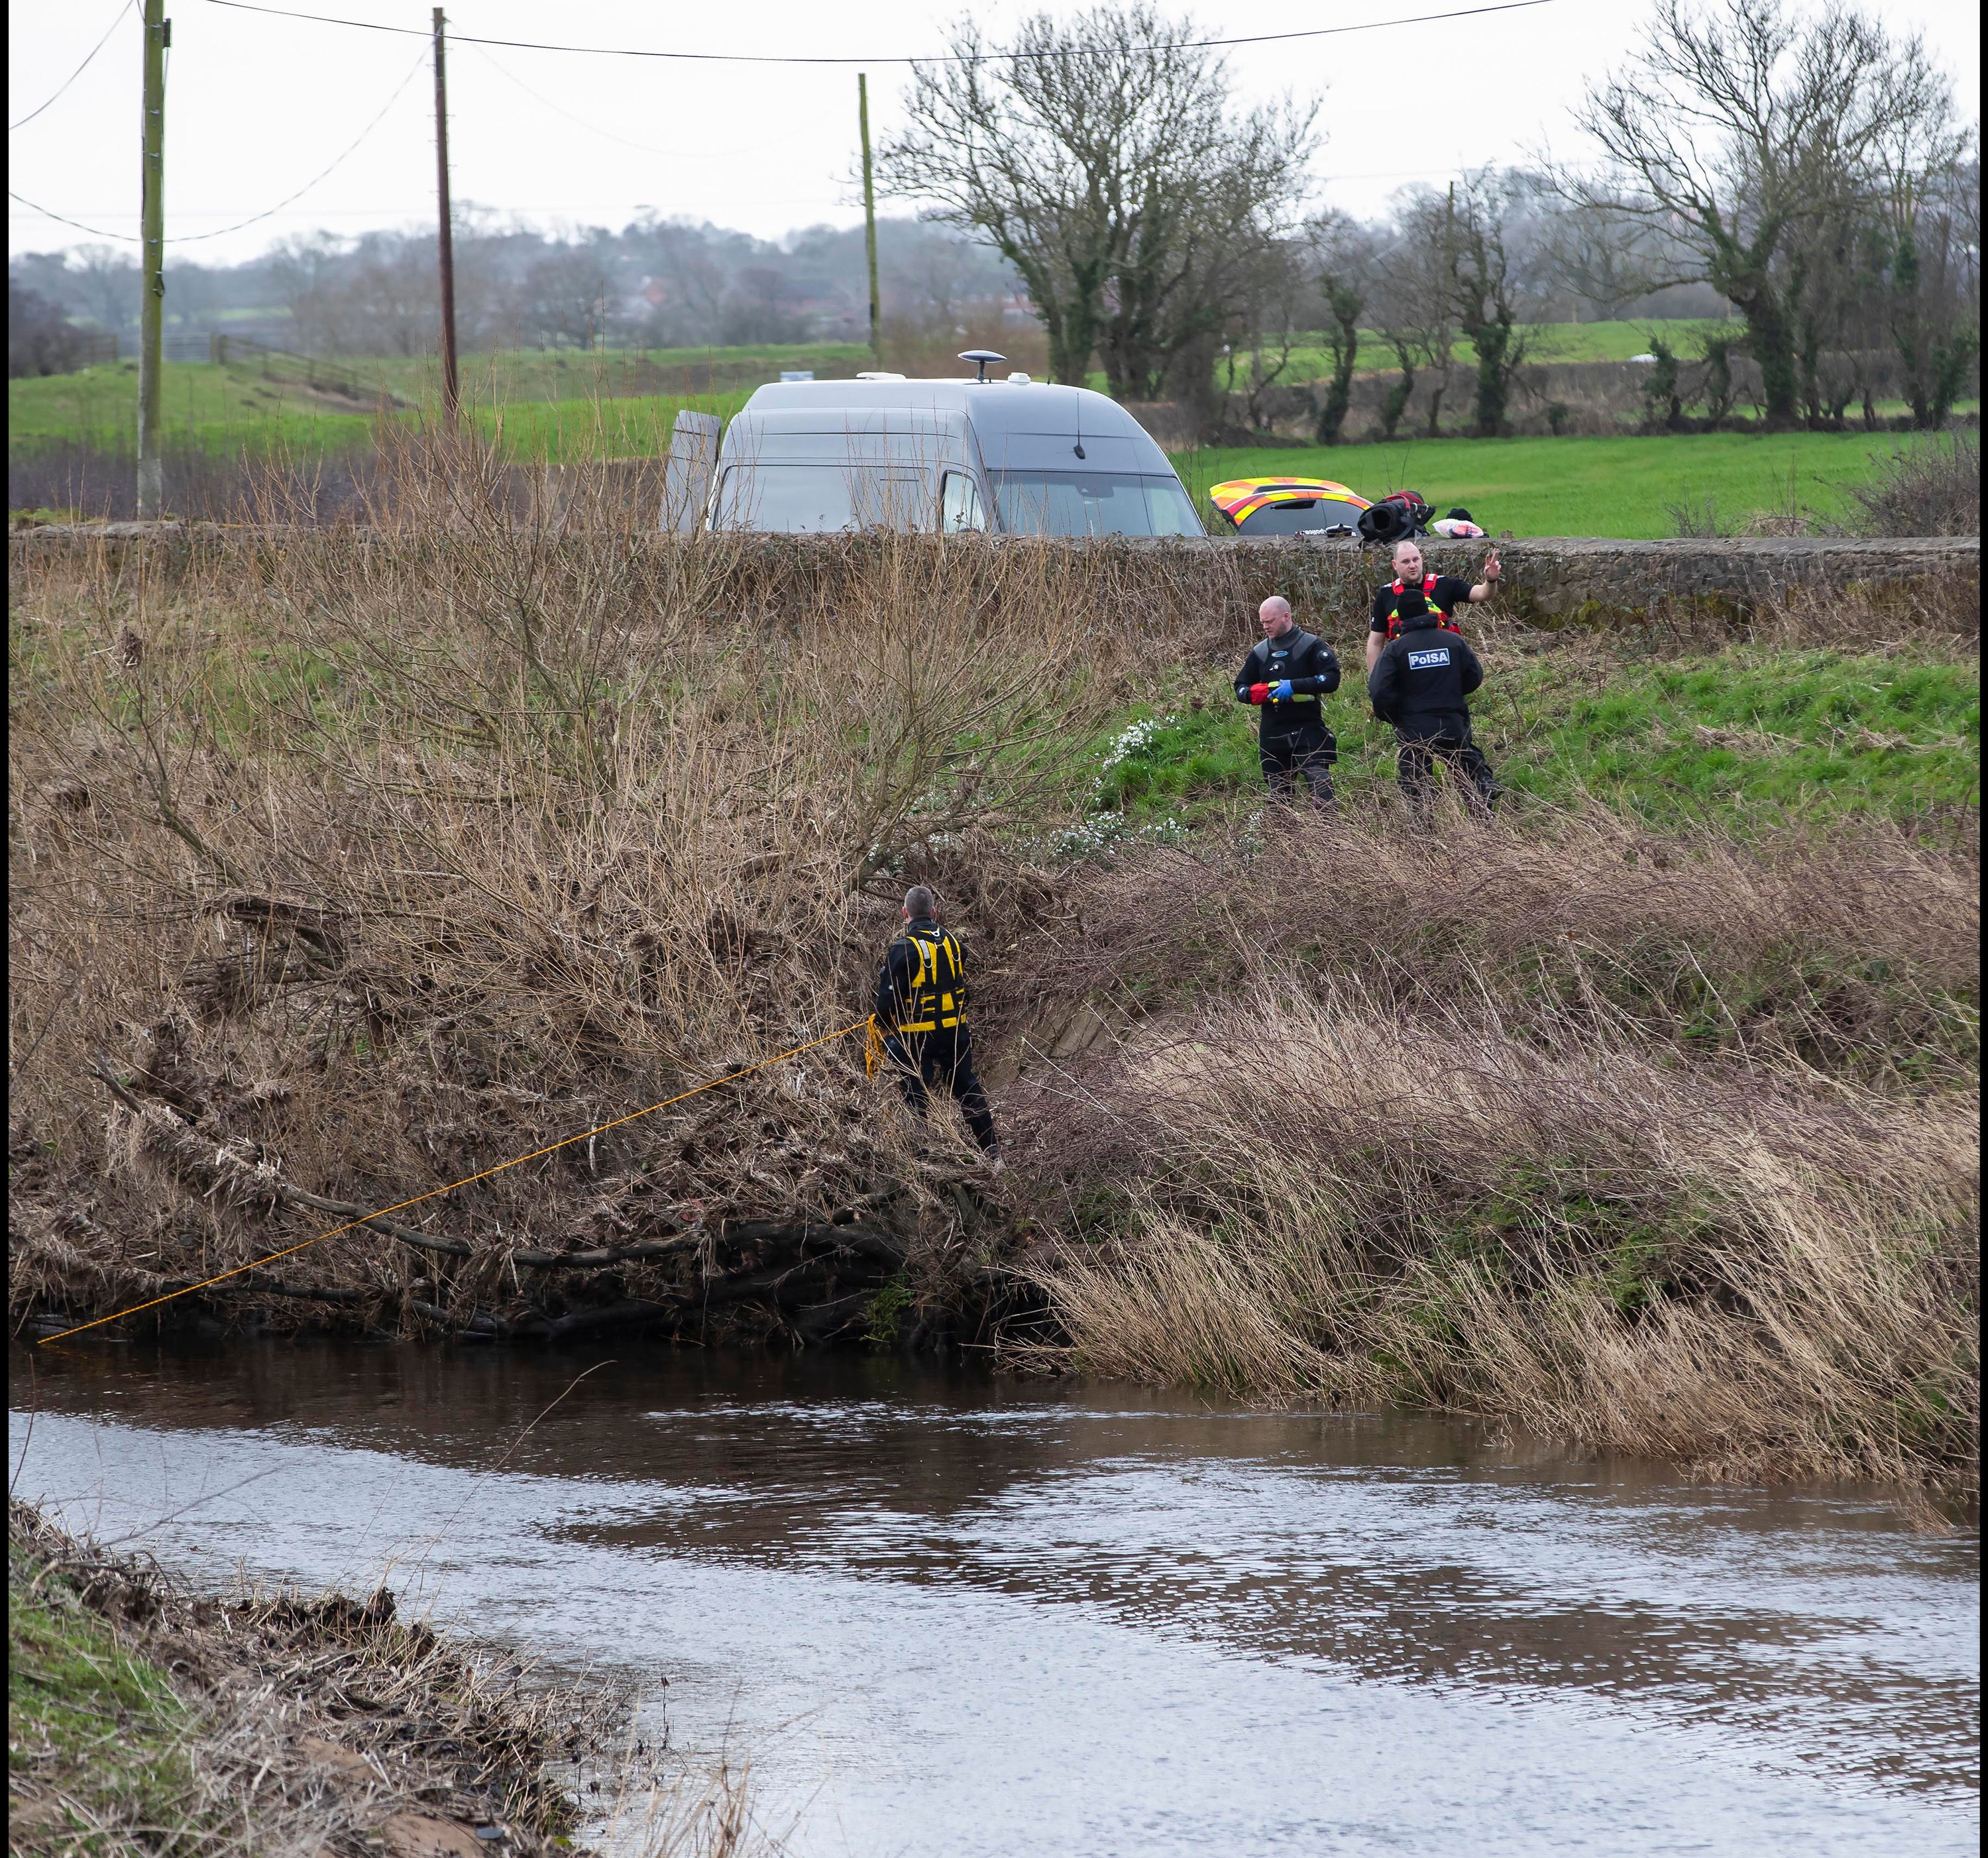 A police diving team searched the River Wyre for the body of the missing mum